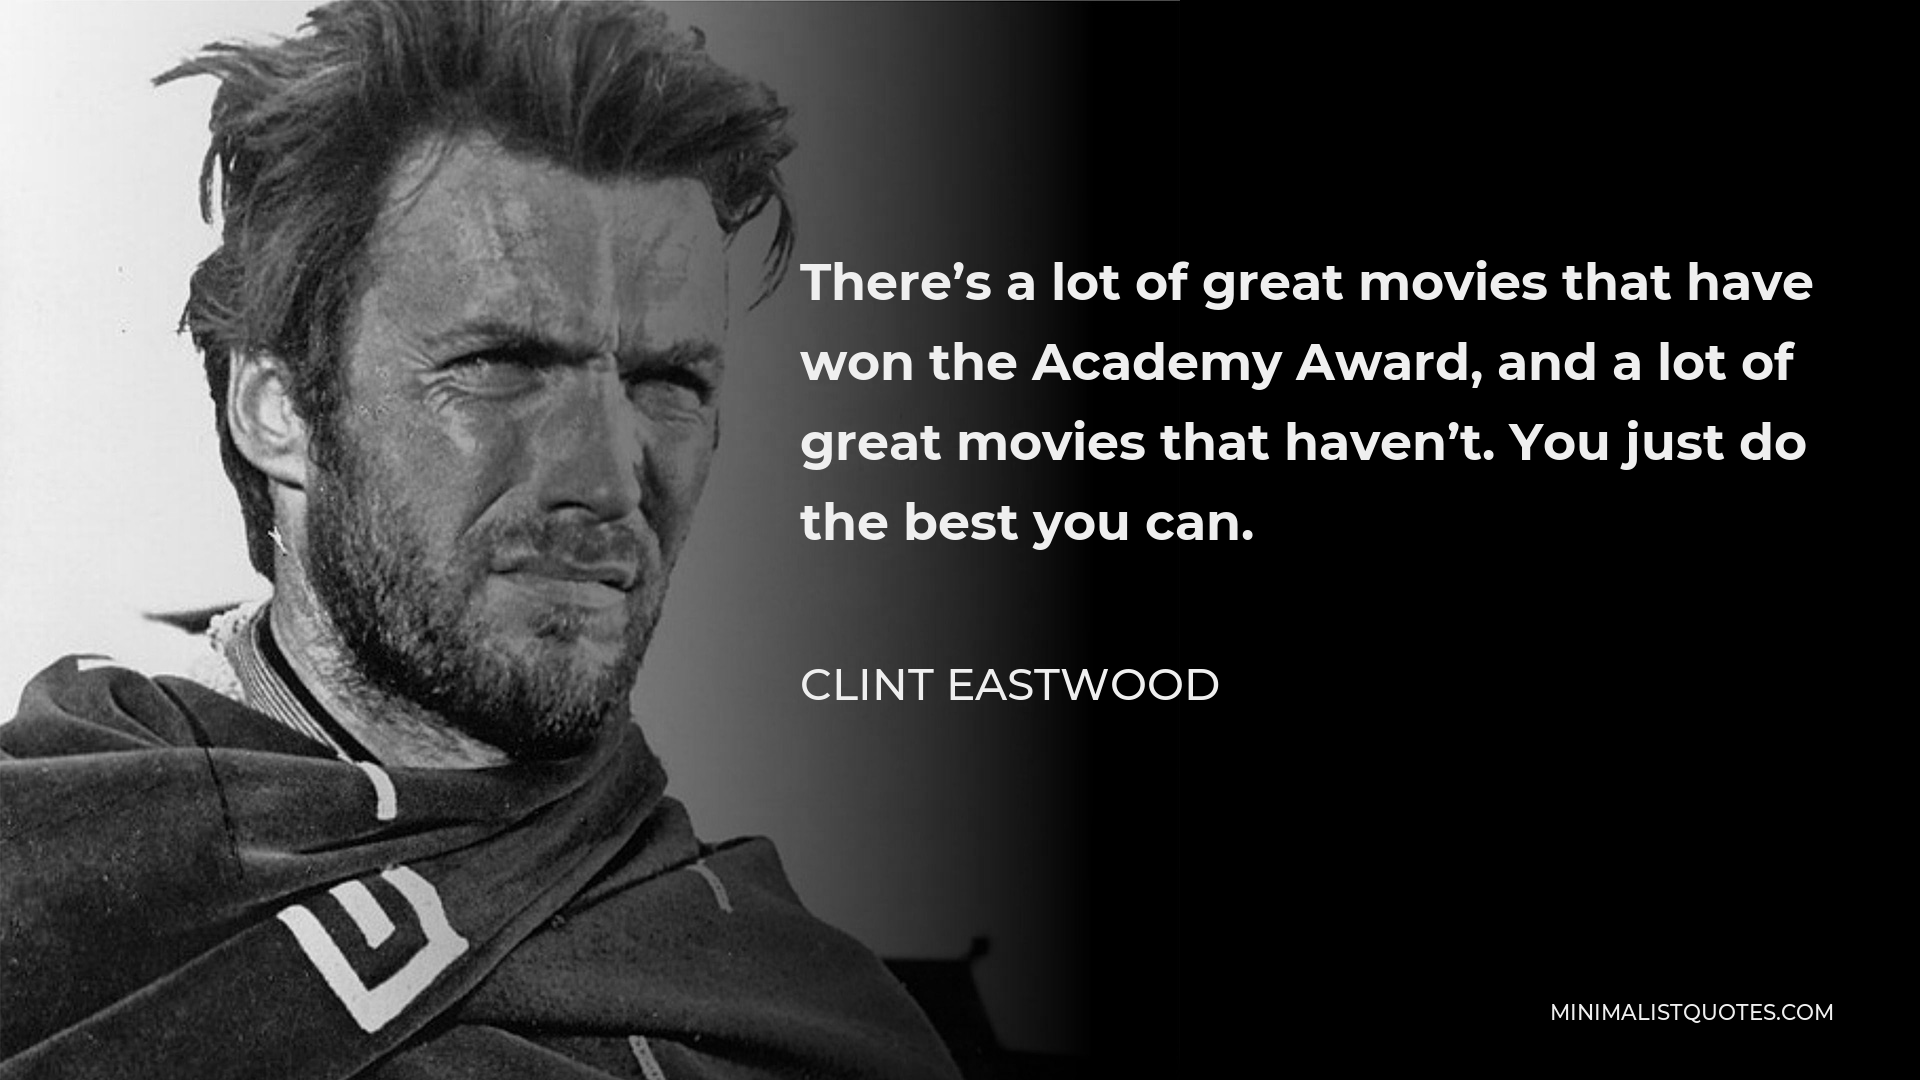 Clint Eastwood Quote - There’s a lot of great movies that have won the Academy Award, and a lot of great movies that haven’t. You just do the best you can.